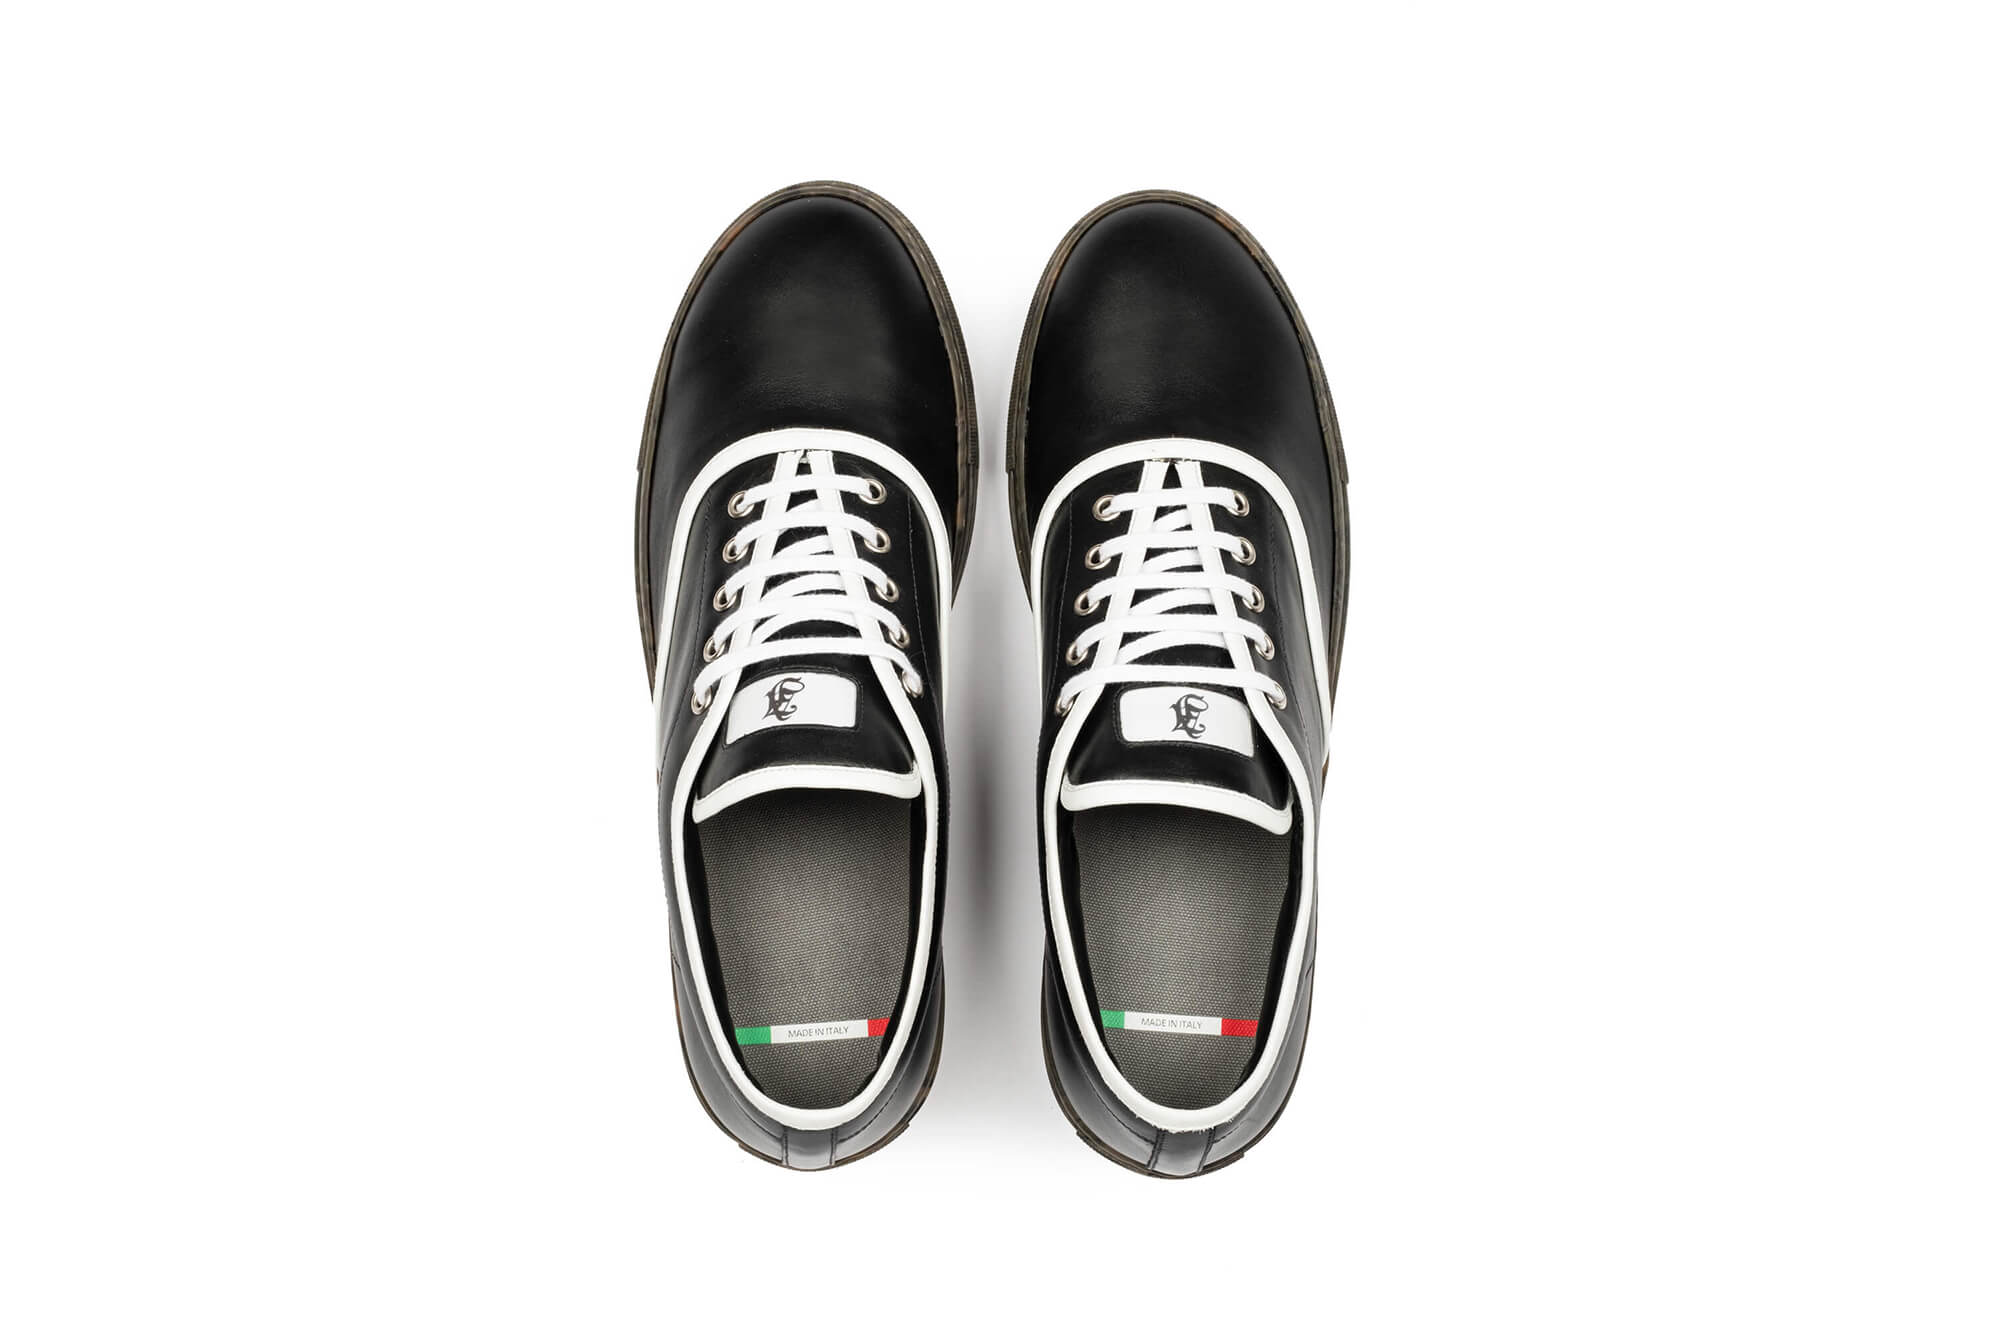 Aj skater customized made in Italy sneakers by Antoine Janssen